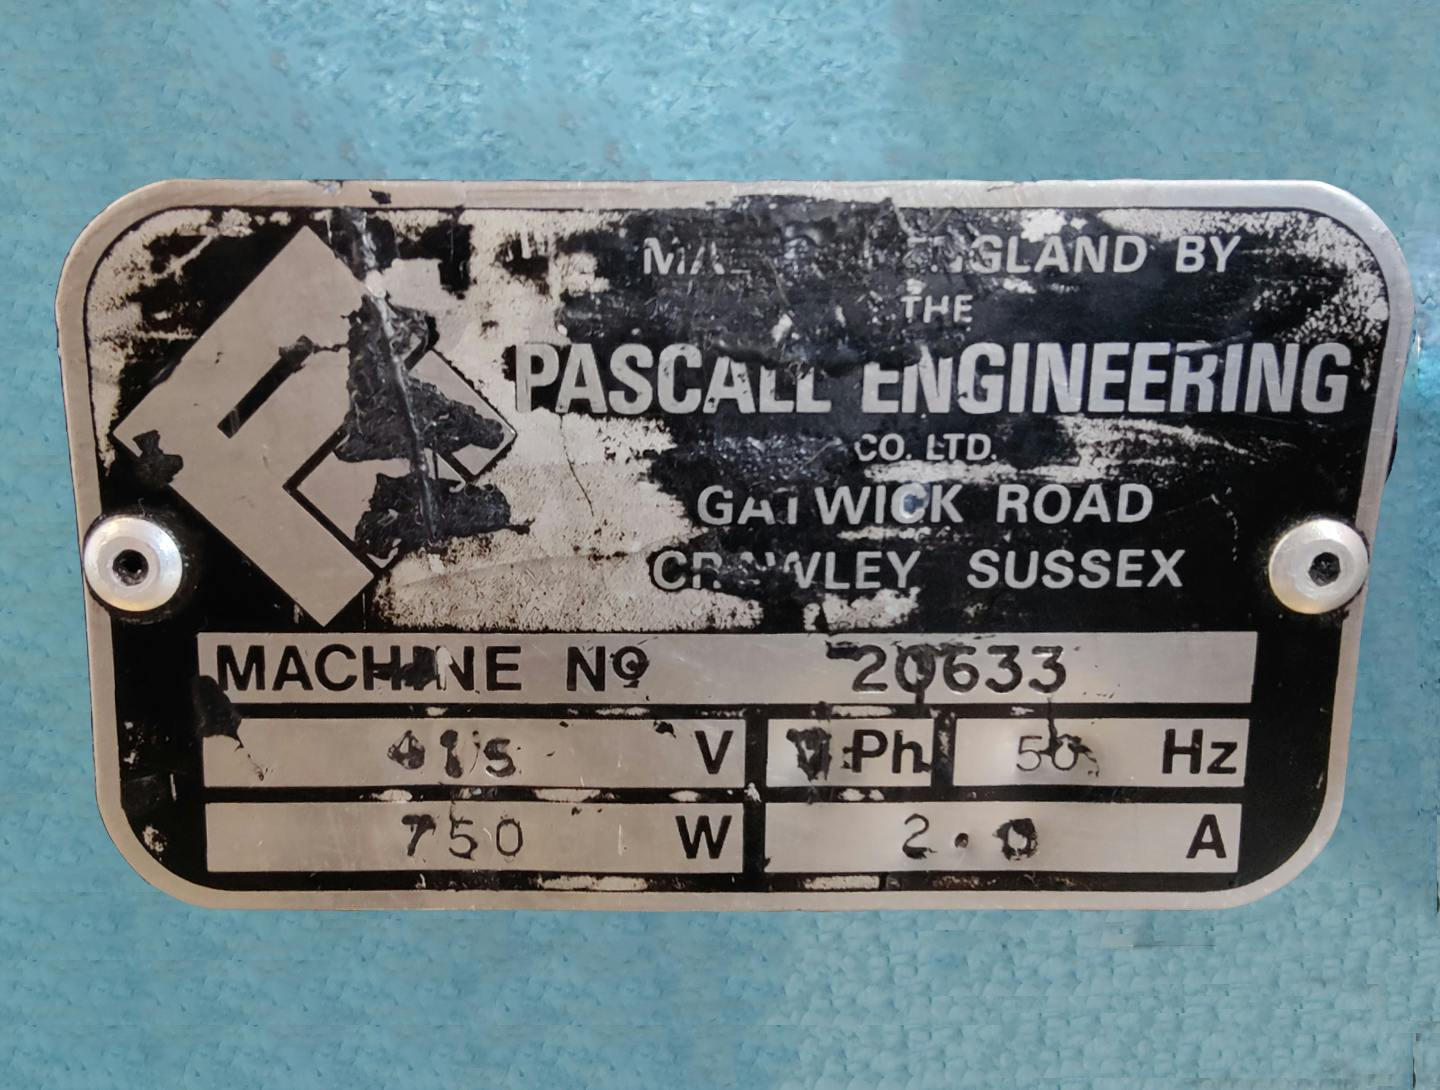 Pascall Engineering Model 2 - Three roll mill - image 10